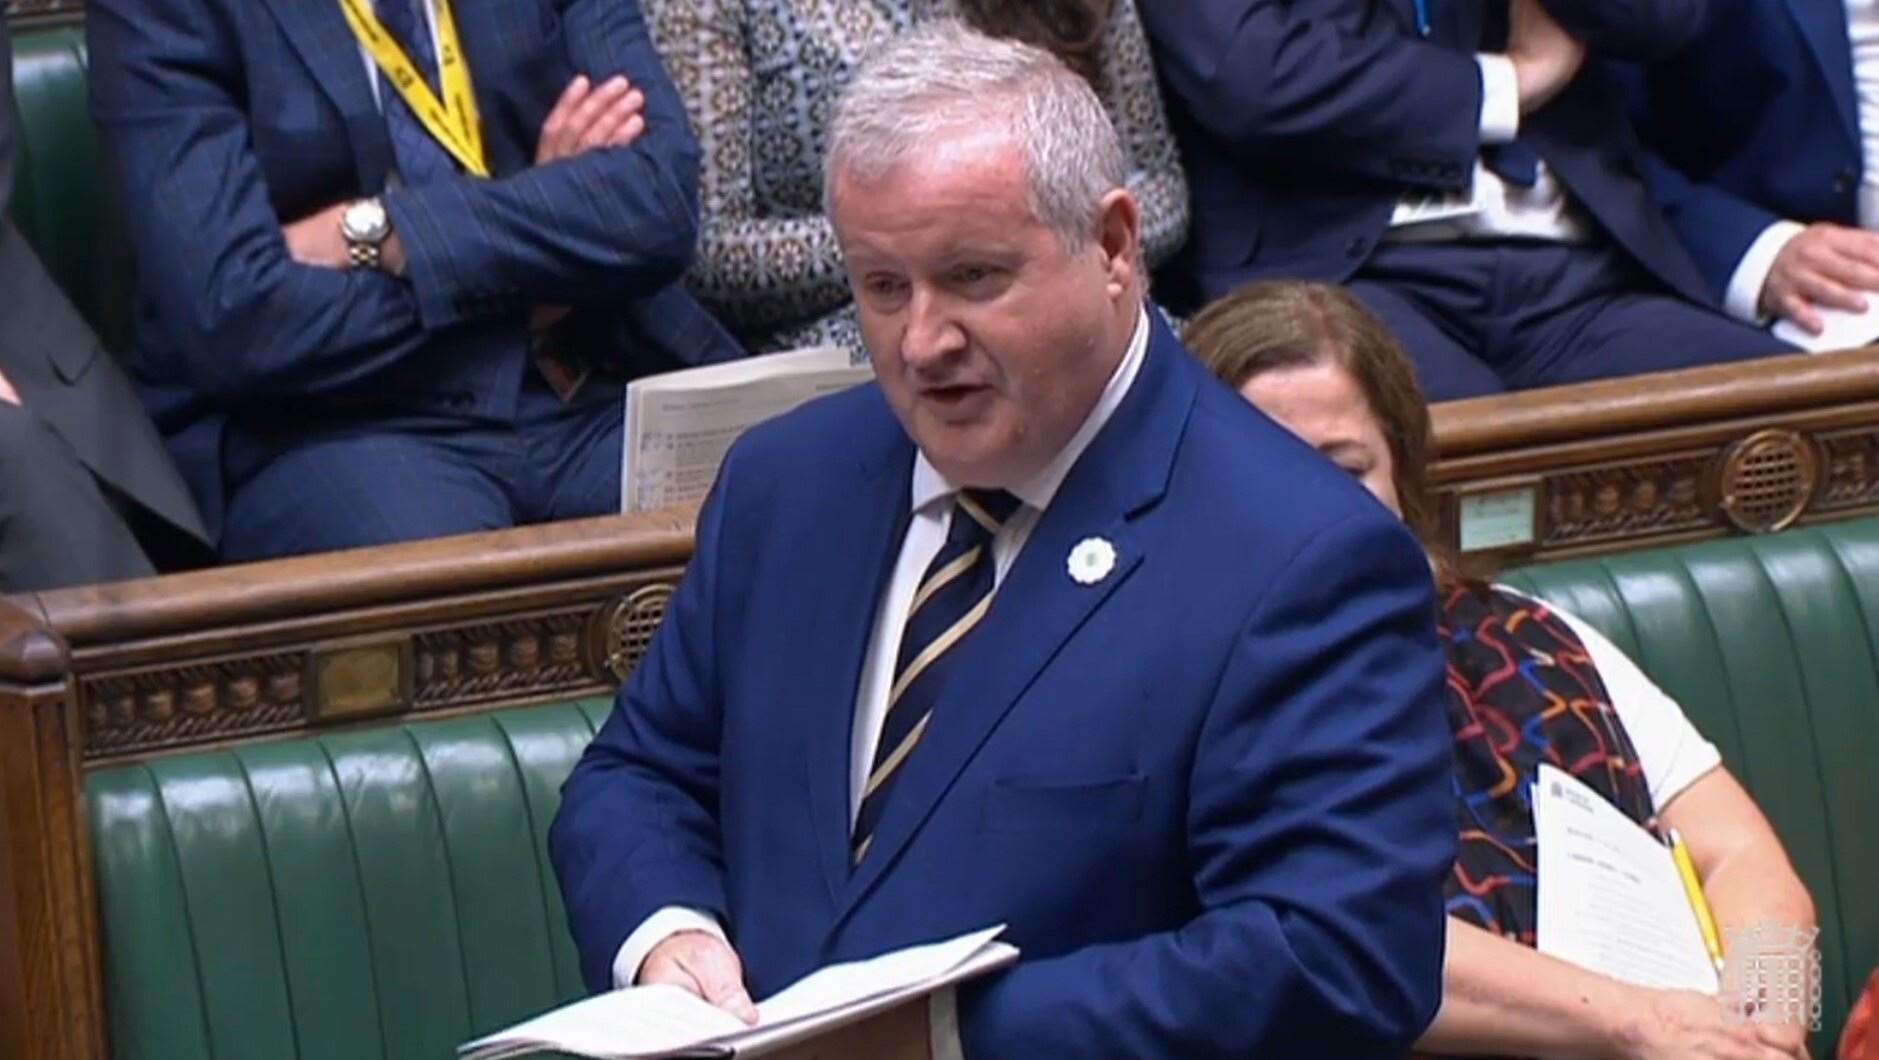 SNP Westminster leader Ian Blackford said “Scotland loses” no matter who becomes the next Prime Minister (House of Commons/PA)